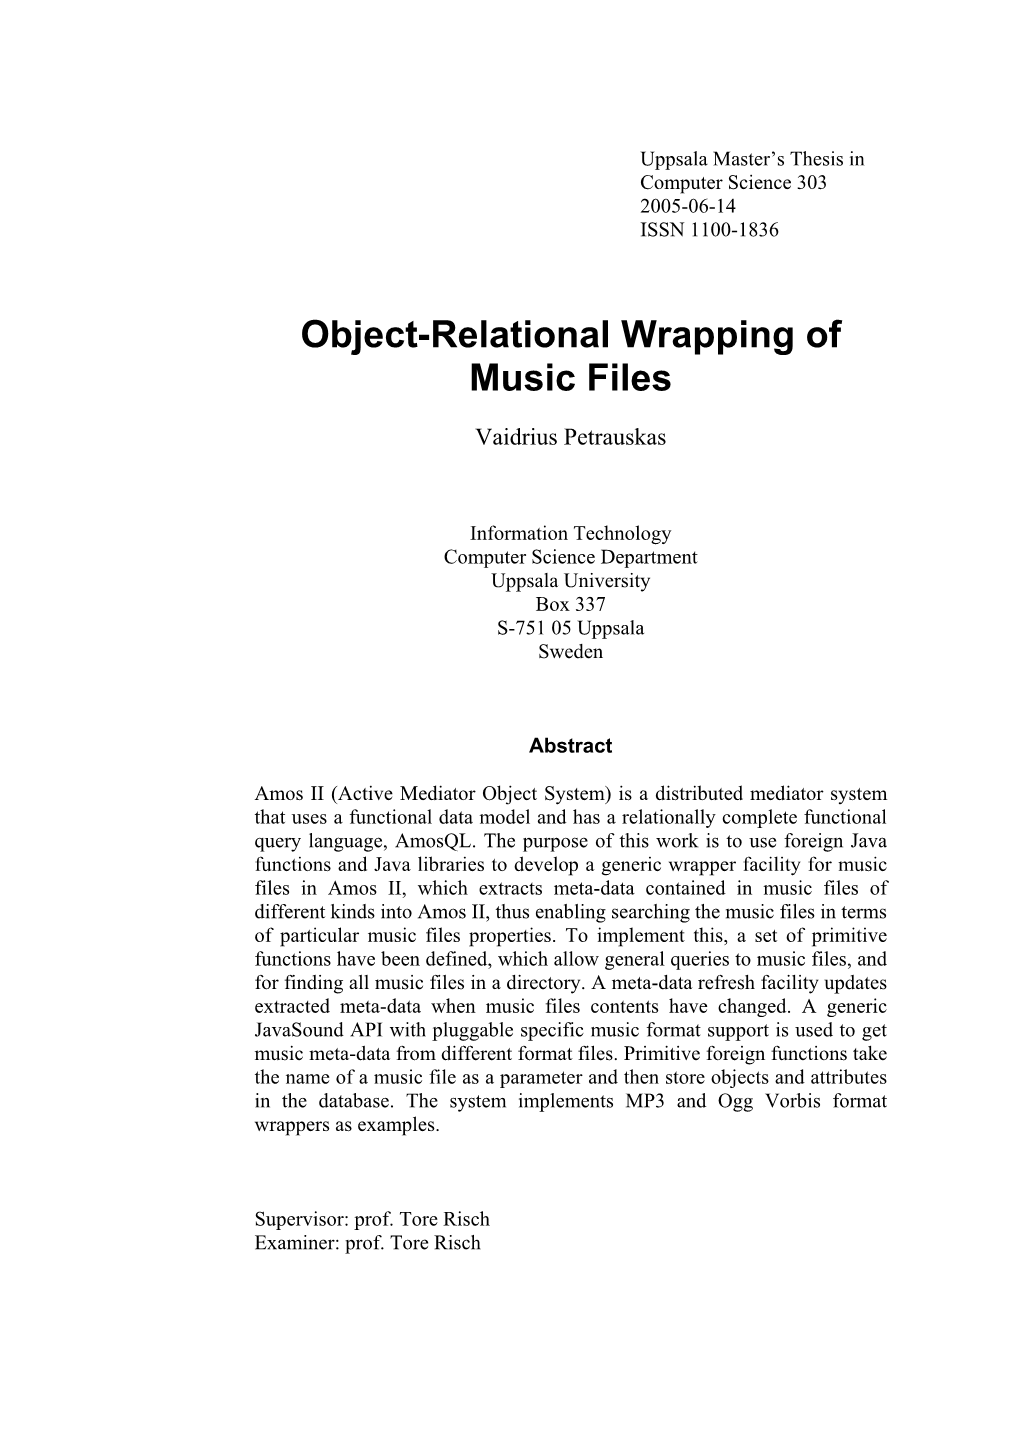 Object-Relational Wrapping of Music Files